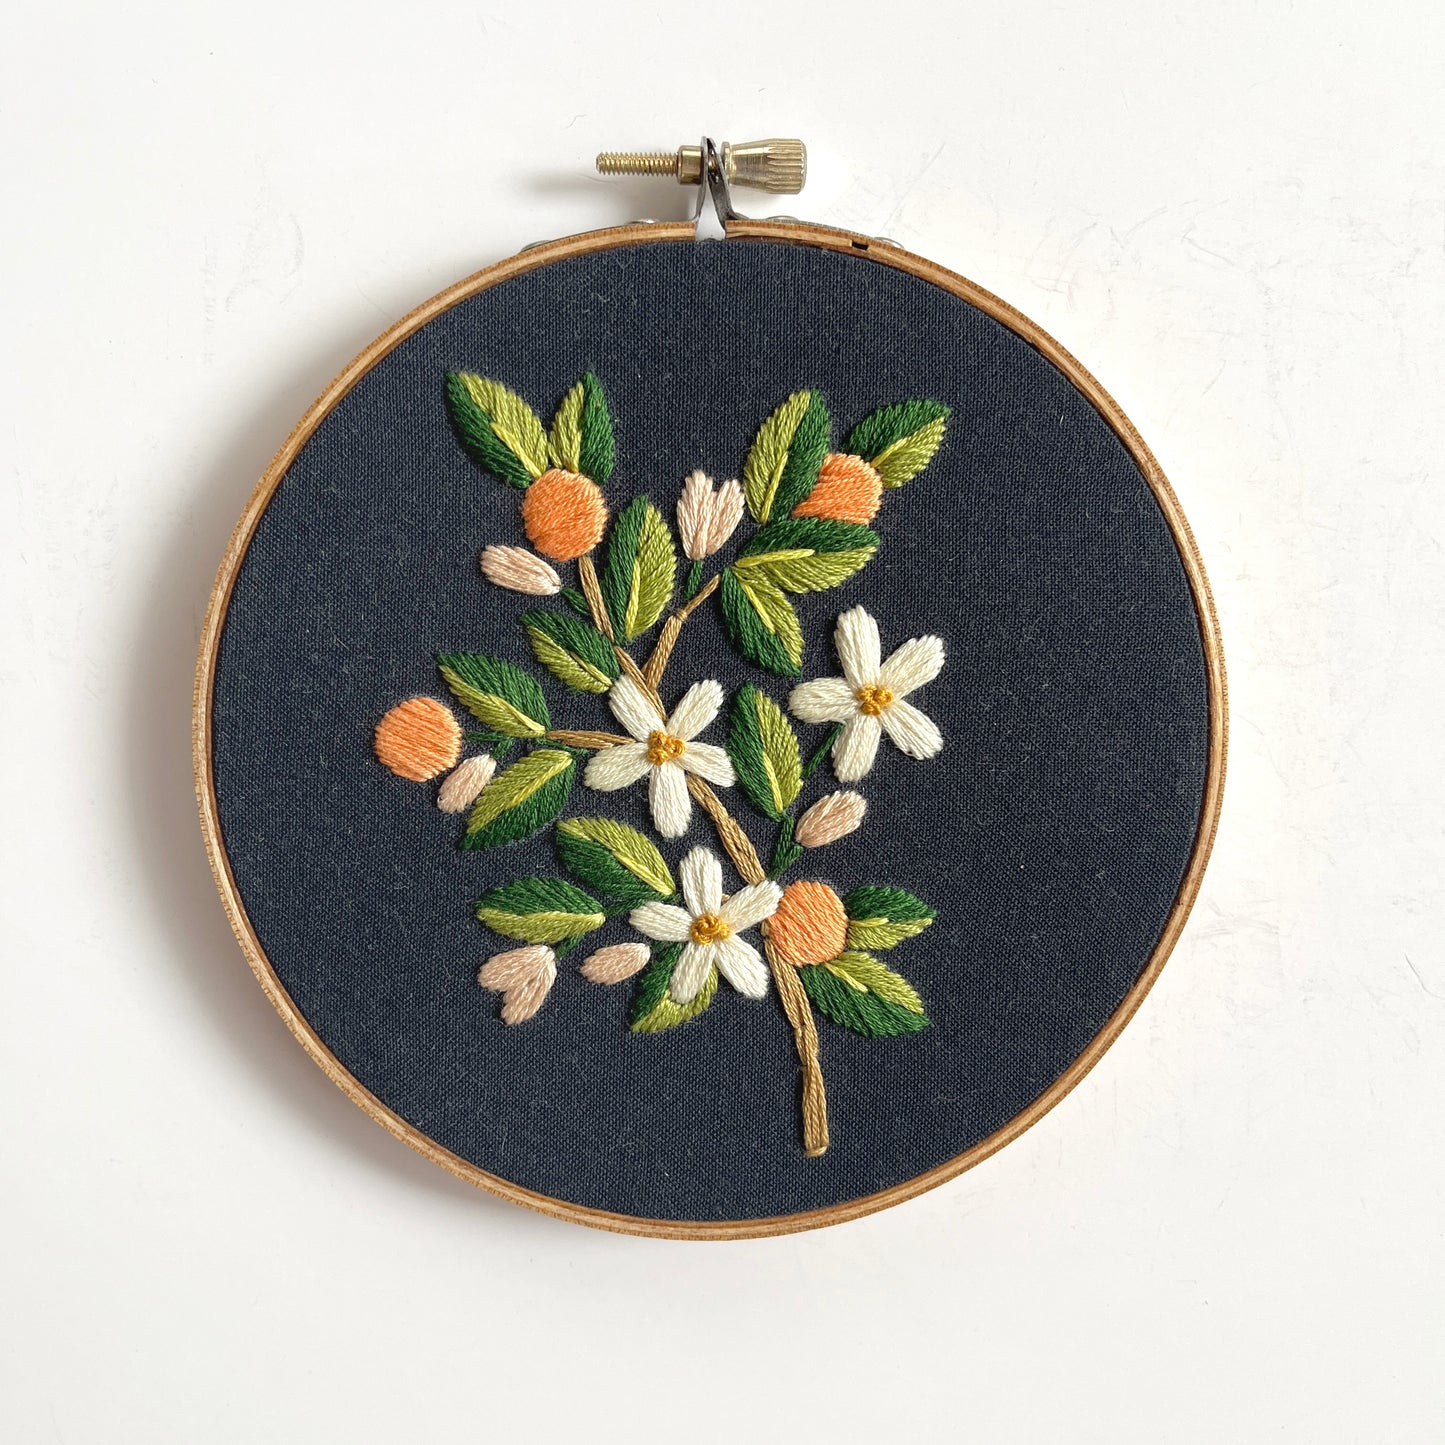 Finished Embroidery Hoops